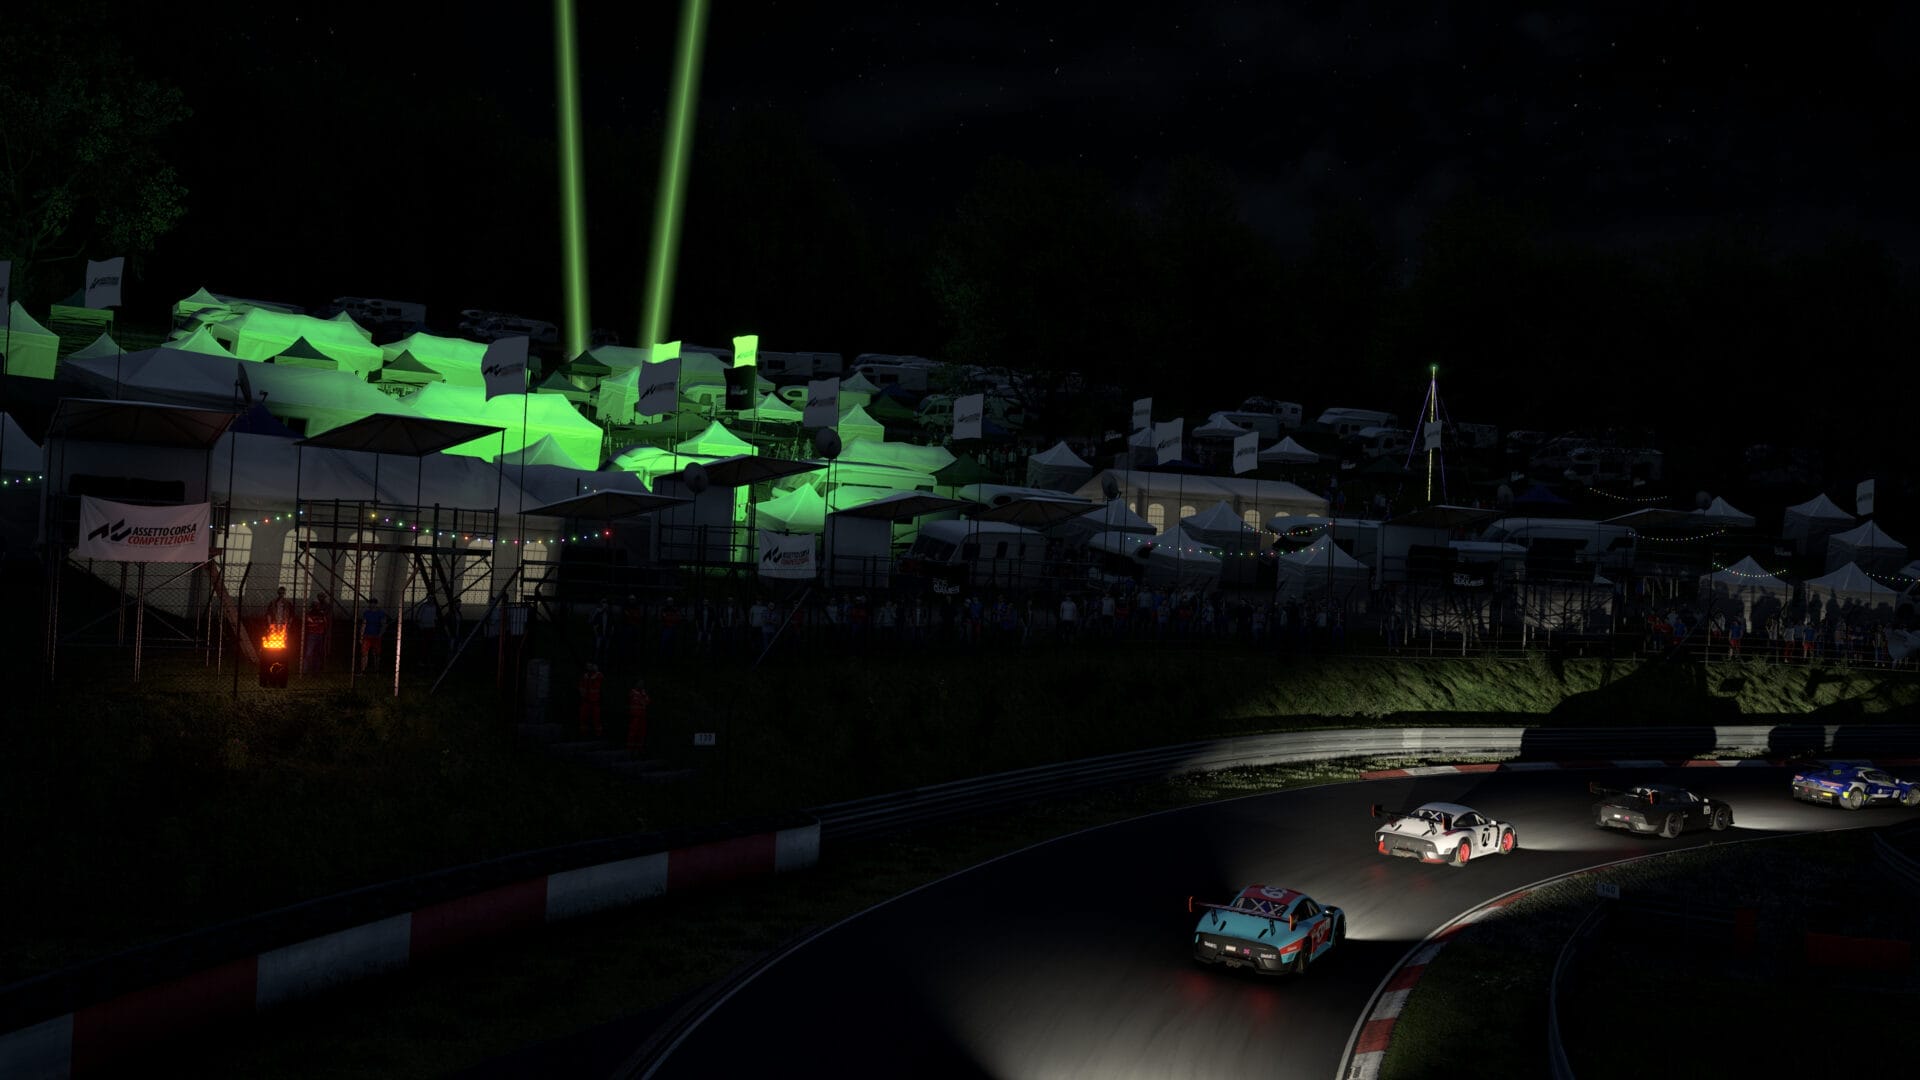 Scenic view of the Nürburgring 24h track at night, with cars zooming past charming gazebos and illuminated details, capturing the thrilling atmosphere.